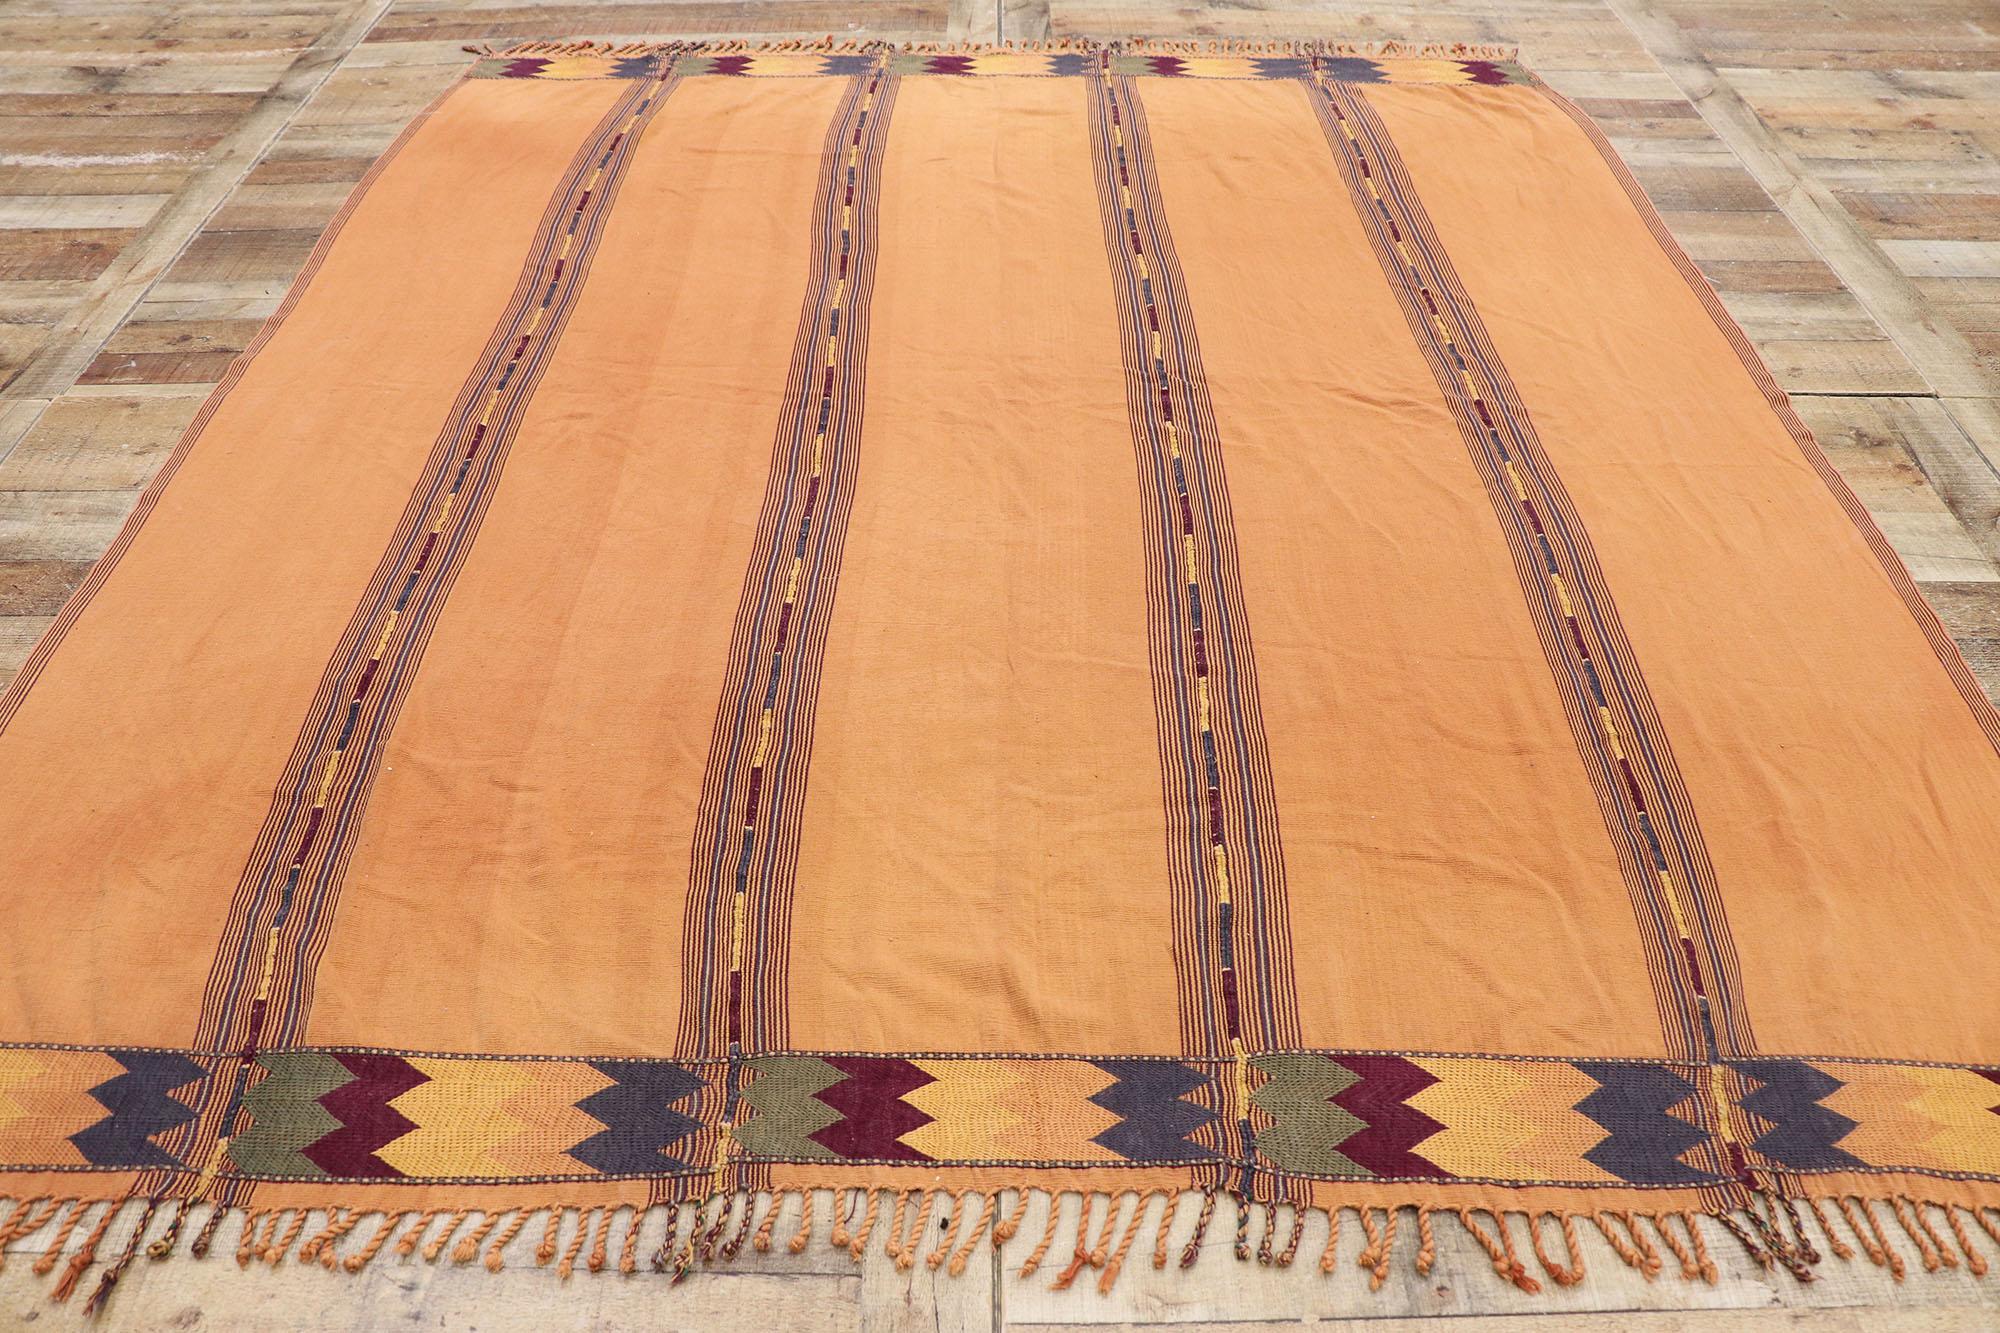 Wool Vintage Berber Moroccan Kilim Rug with Southwestern Tribal Style For Sale